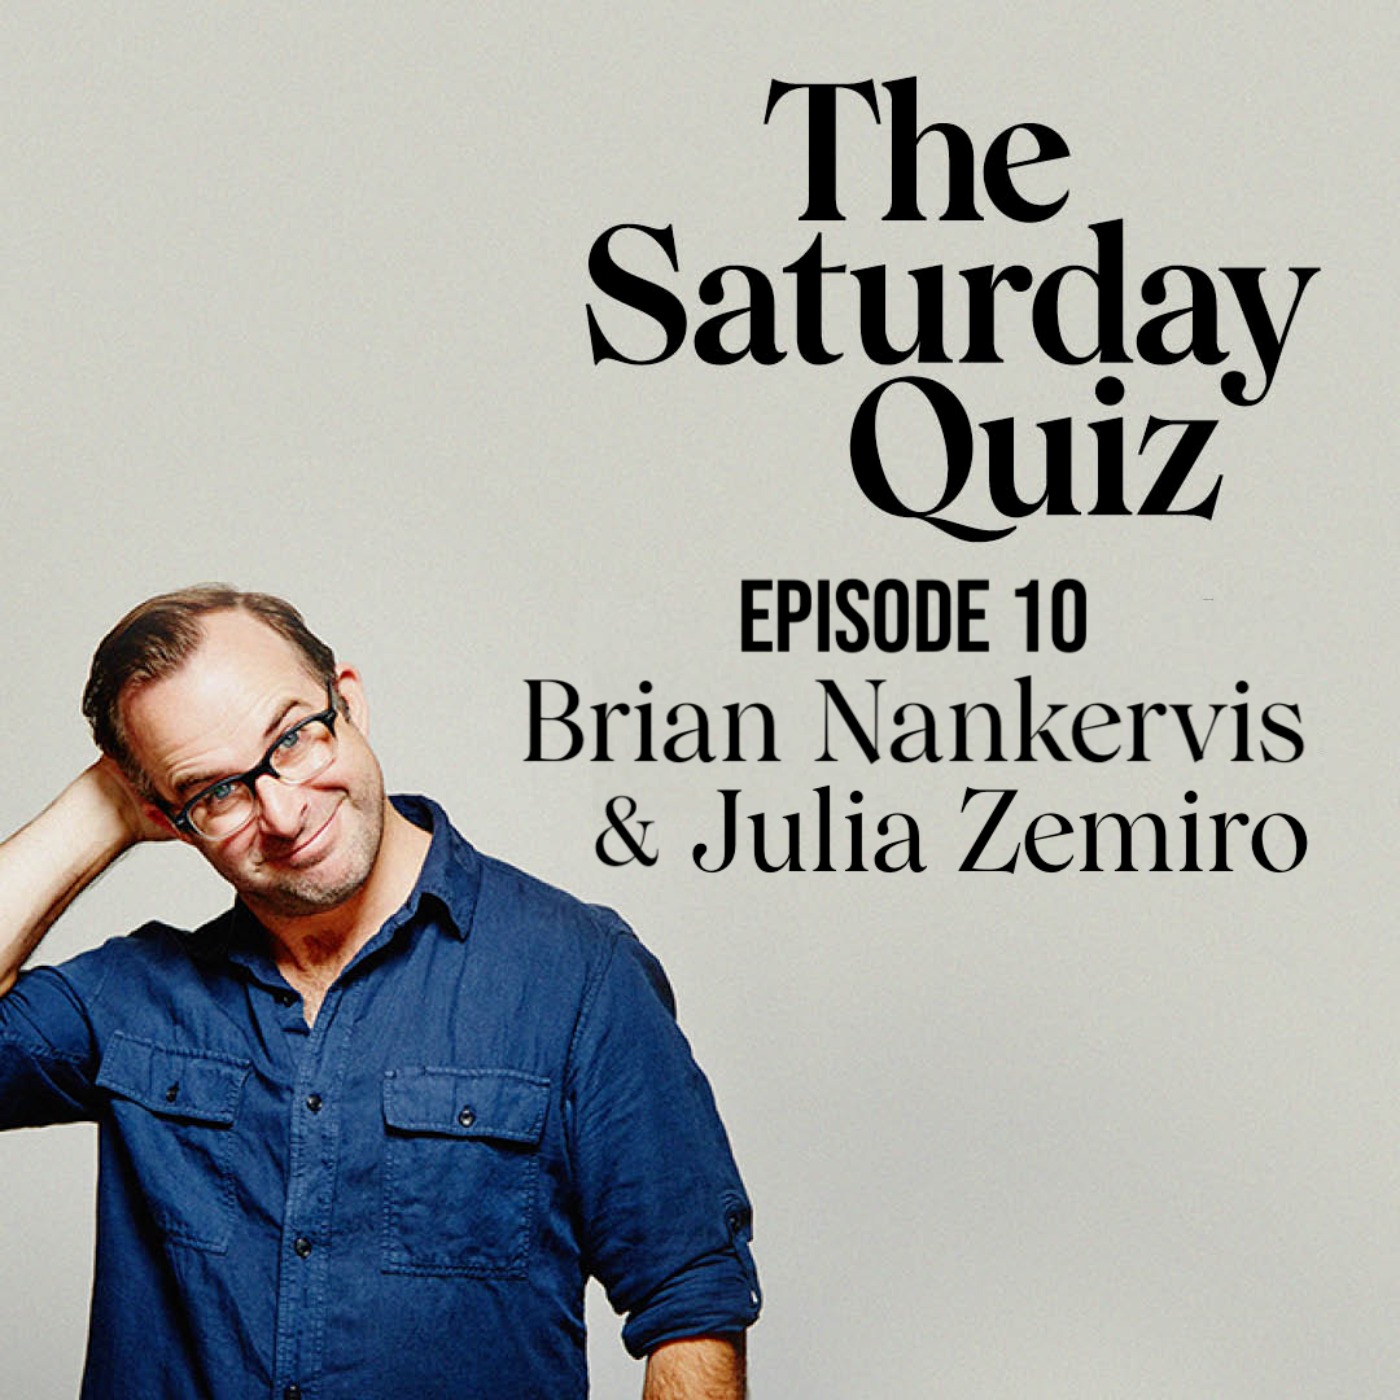 Educational and Humorous  with Brian Nankervis and Julia Zemiro